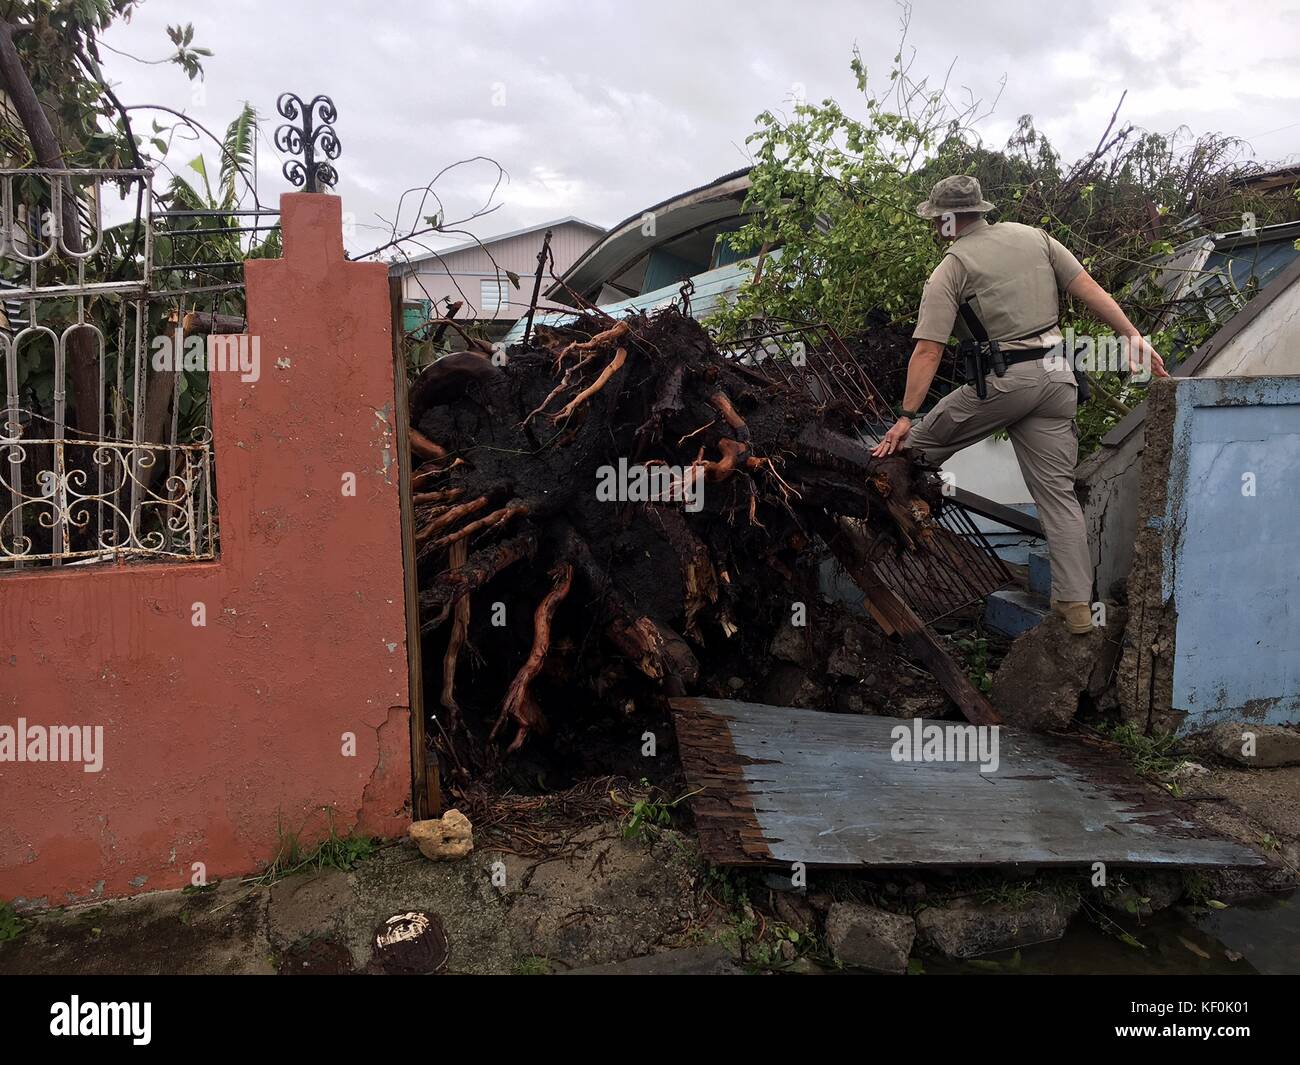 Bureau of Land Management law enforcement officers search and rescue  residents from destroyed areas in the aftermath of Hurricane Maria  September 22, 2017 in Puerto Rico Stock Photo - Alamy